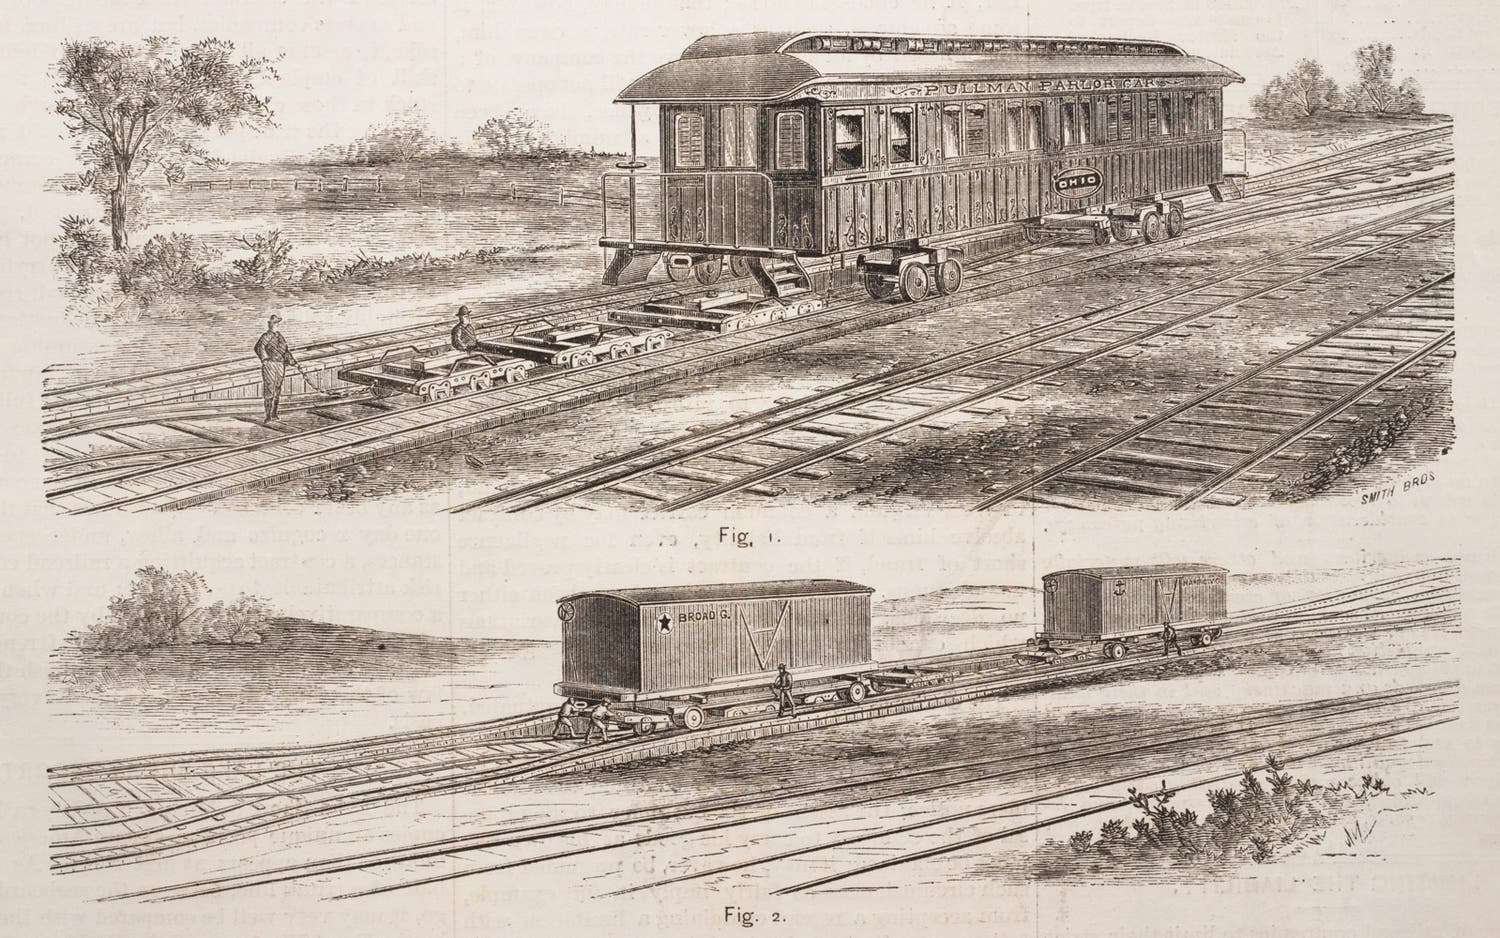 One remedy for switching gauges was the Ramsey Car Transfer Apparatus.  Instead of hoisting the cars off the trucks, the tracks were lowered and trucks with wheels of a different gauge were attached.